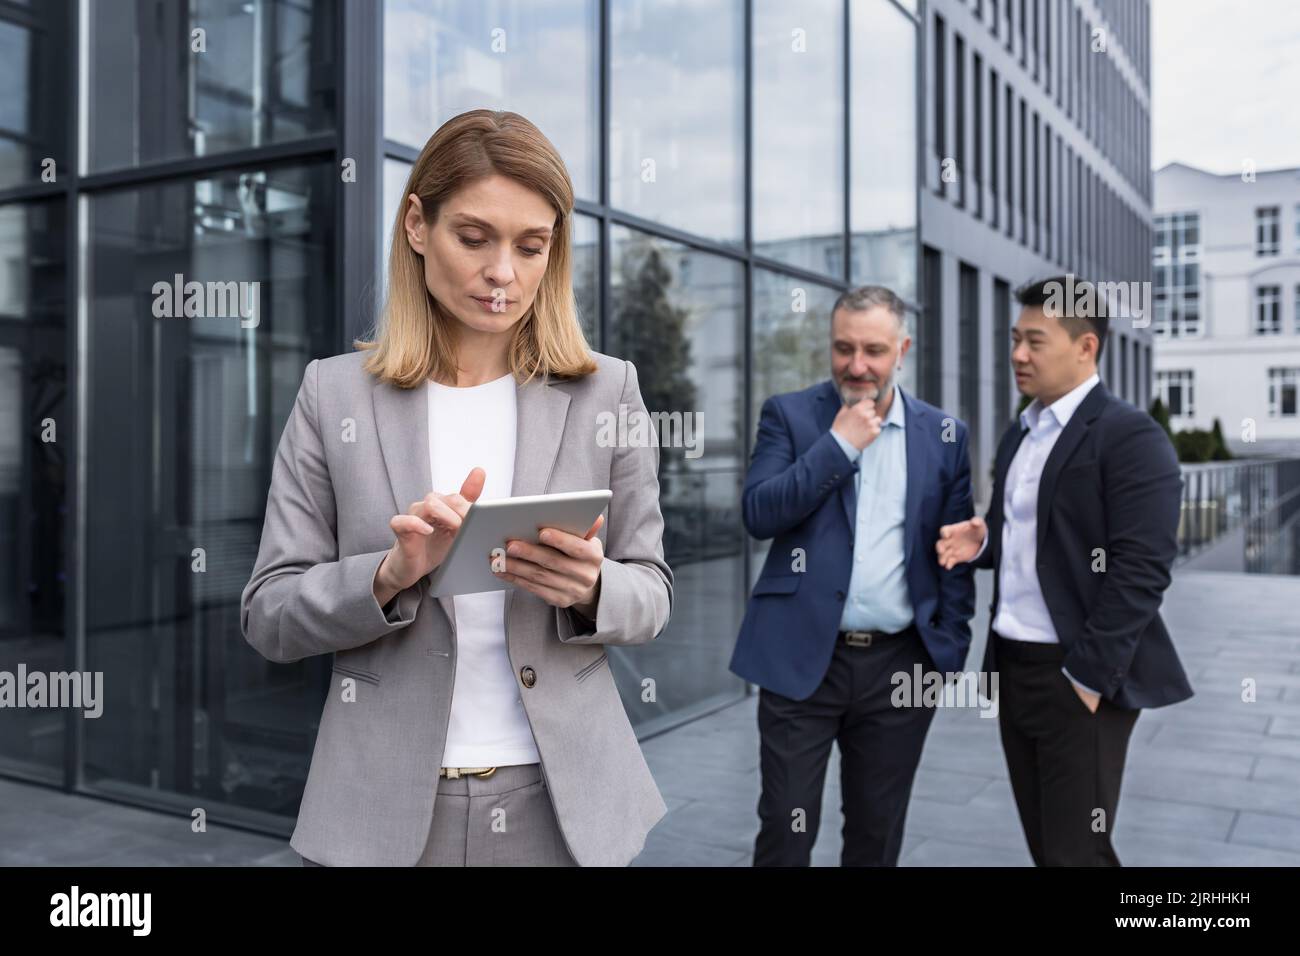 Harassment at work, group of business people outside office building, men discussing behind woman boss's back, gossiping and stalking Stock Photo